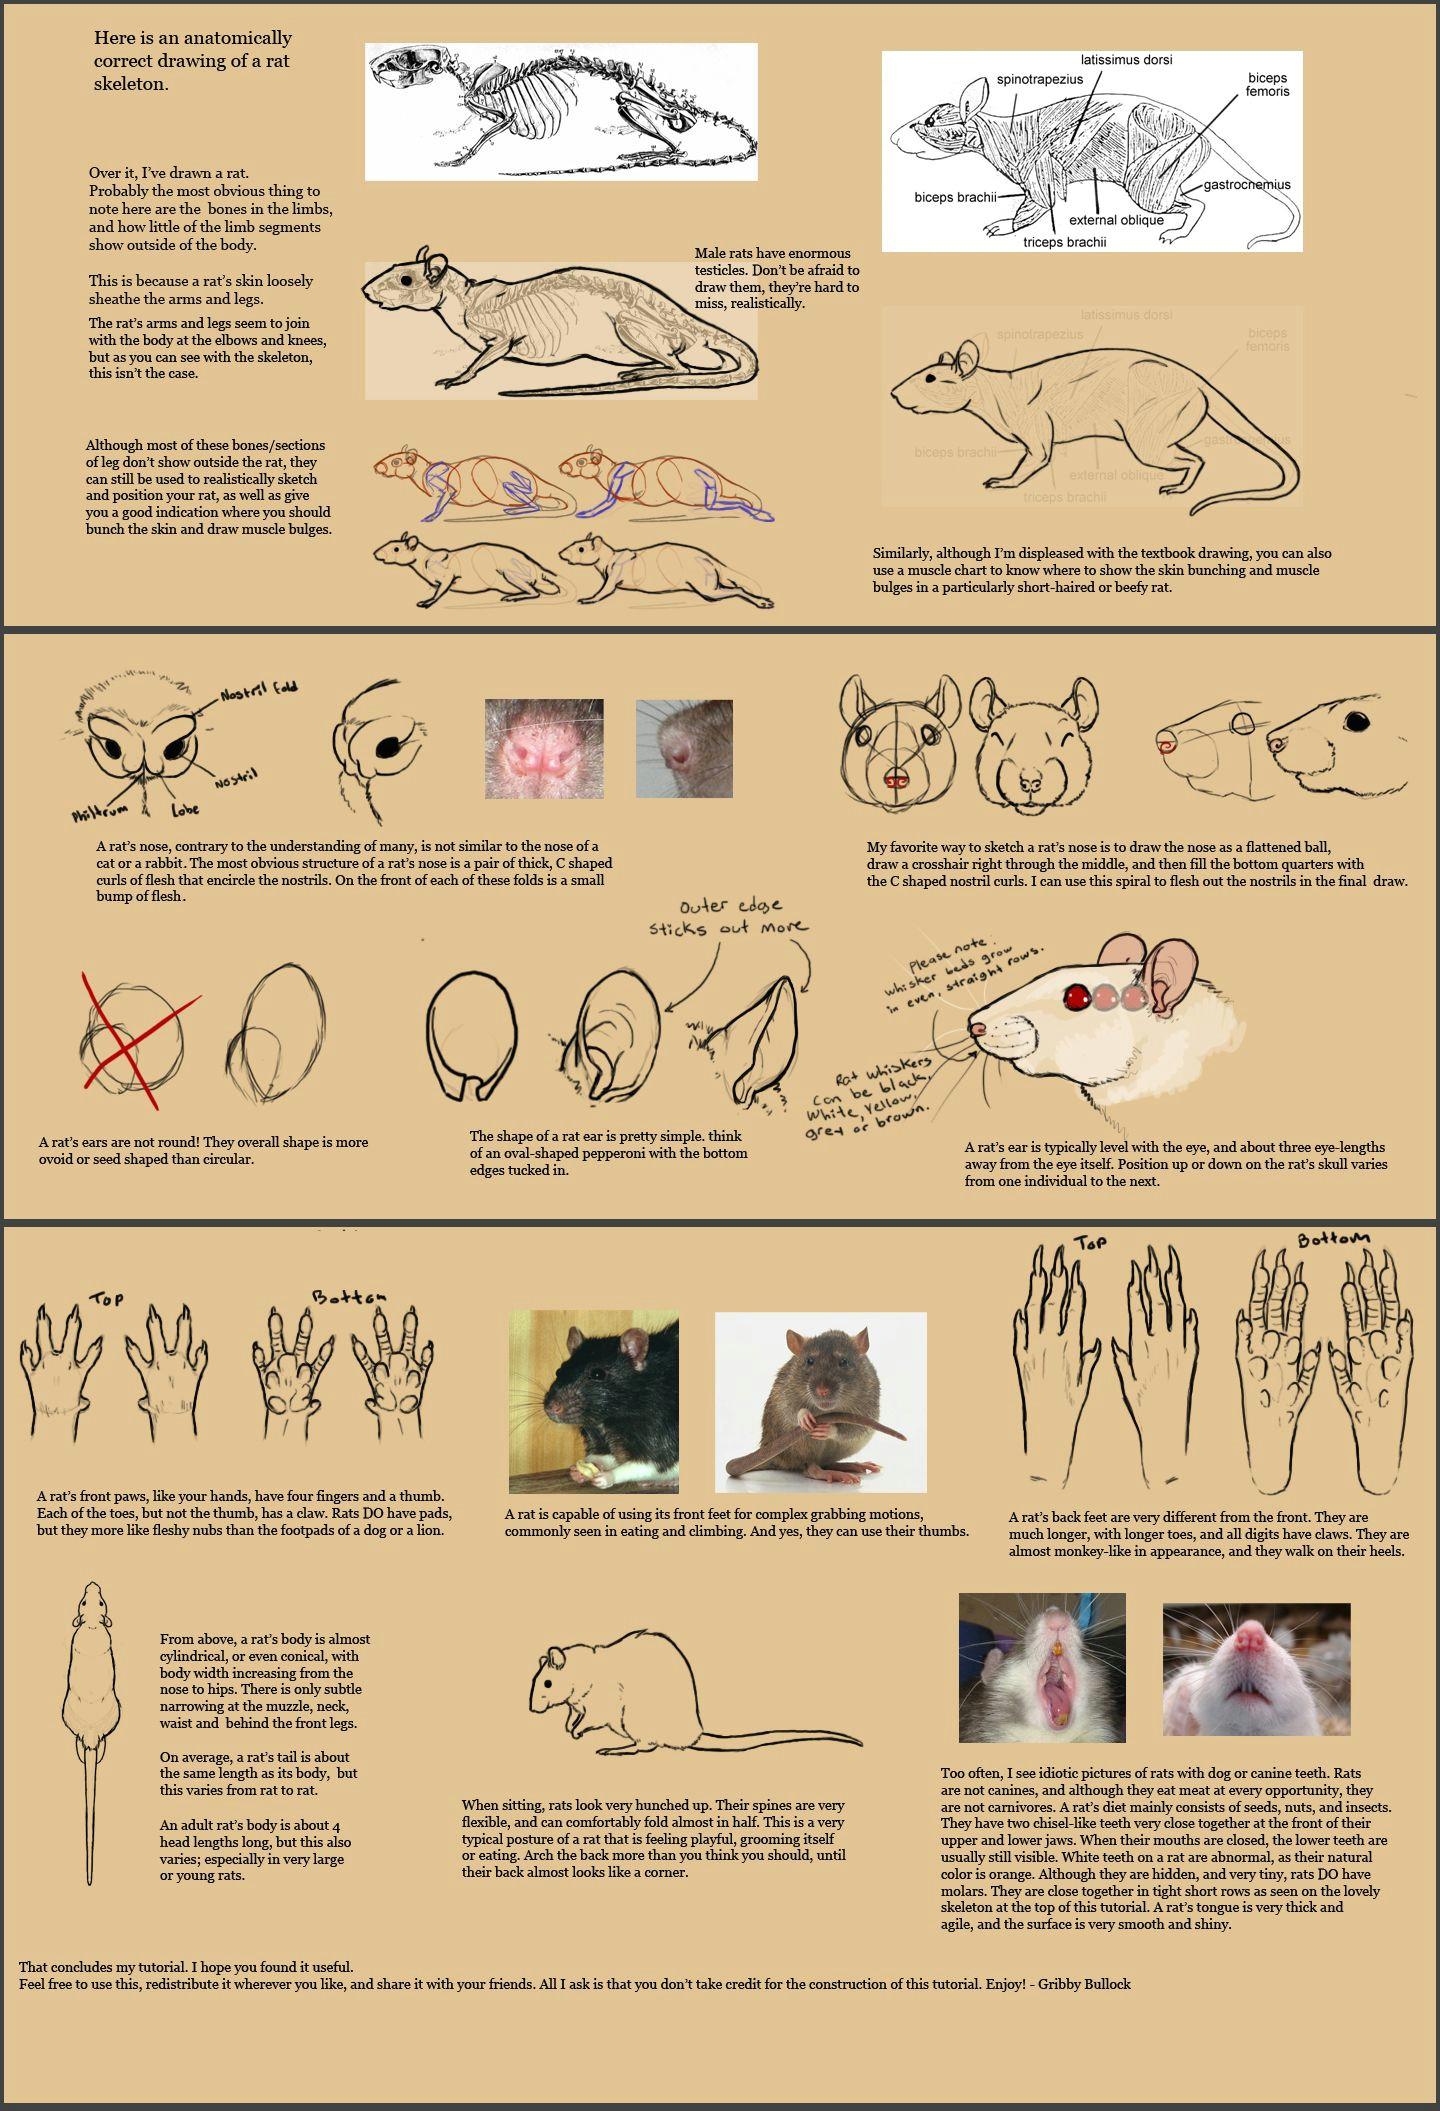 rat anatomy and proportions by deskleaves animal sketches animal drawings art drawings